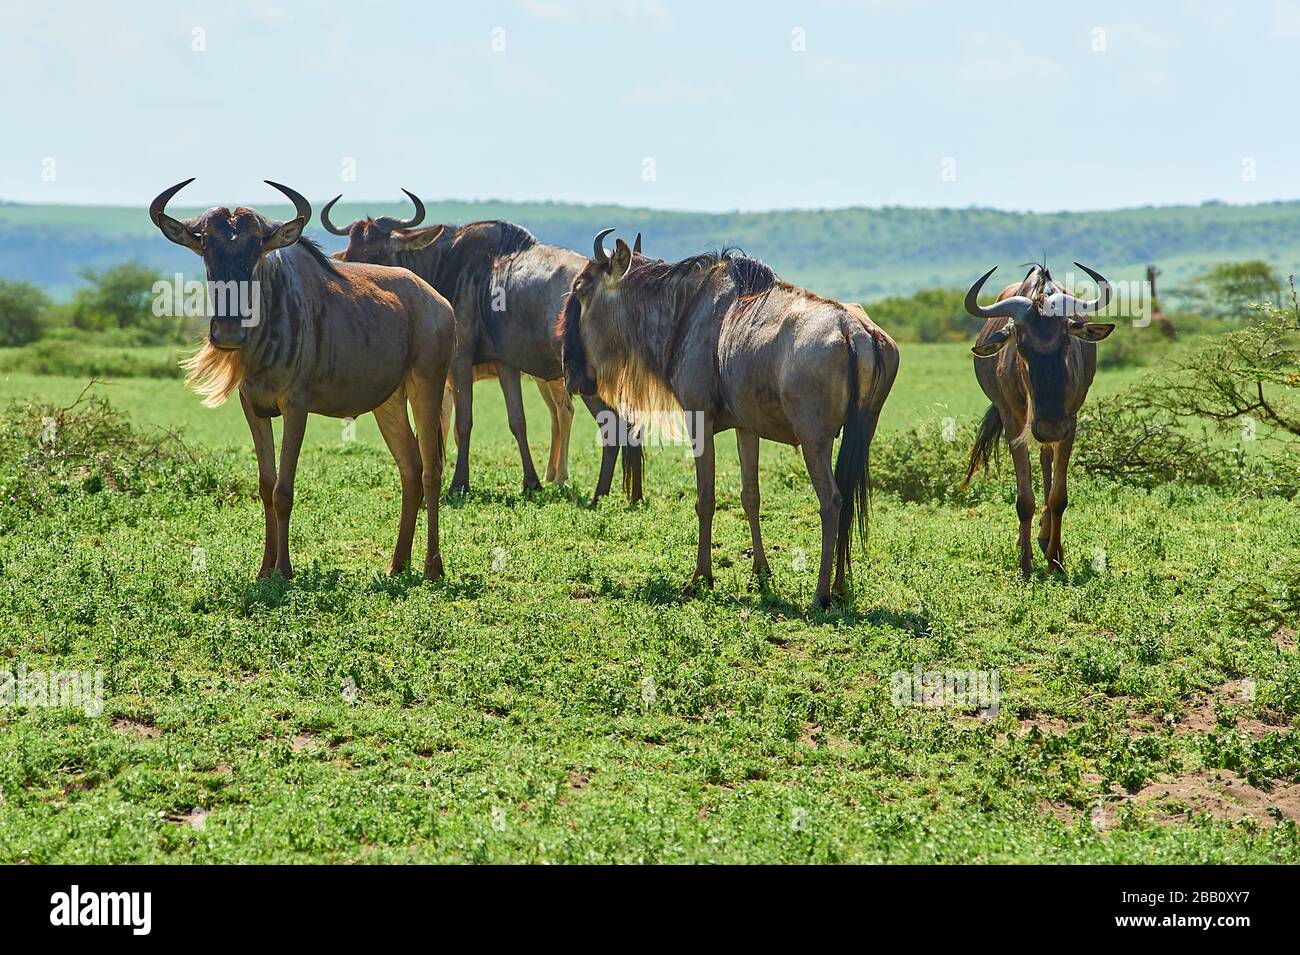 Wildebeest on the Eastern migration route passing through the lush Sanyan plains, Norther Tanzania Stock Photo